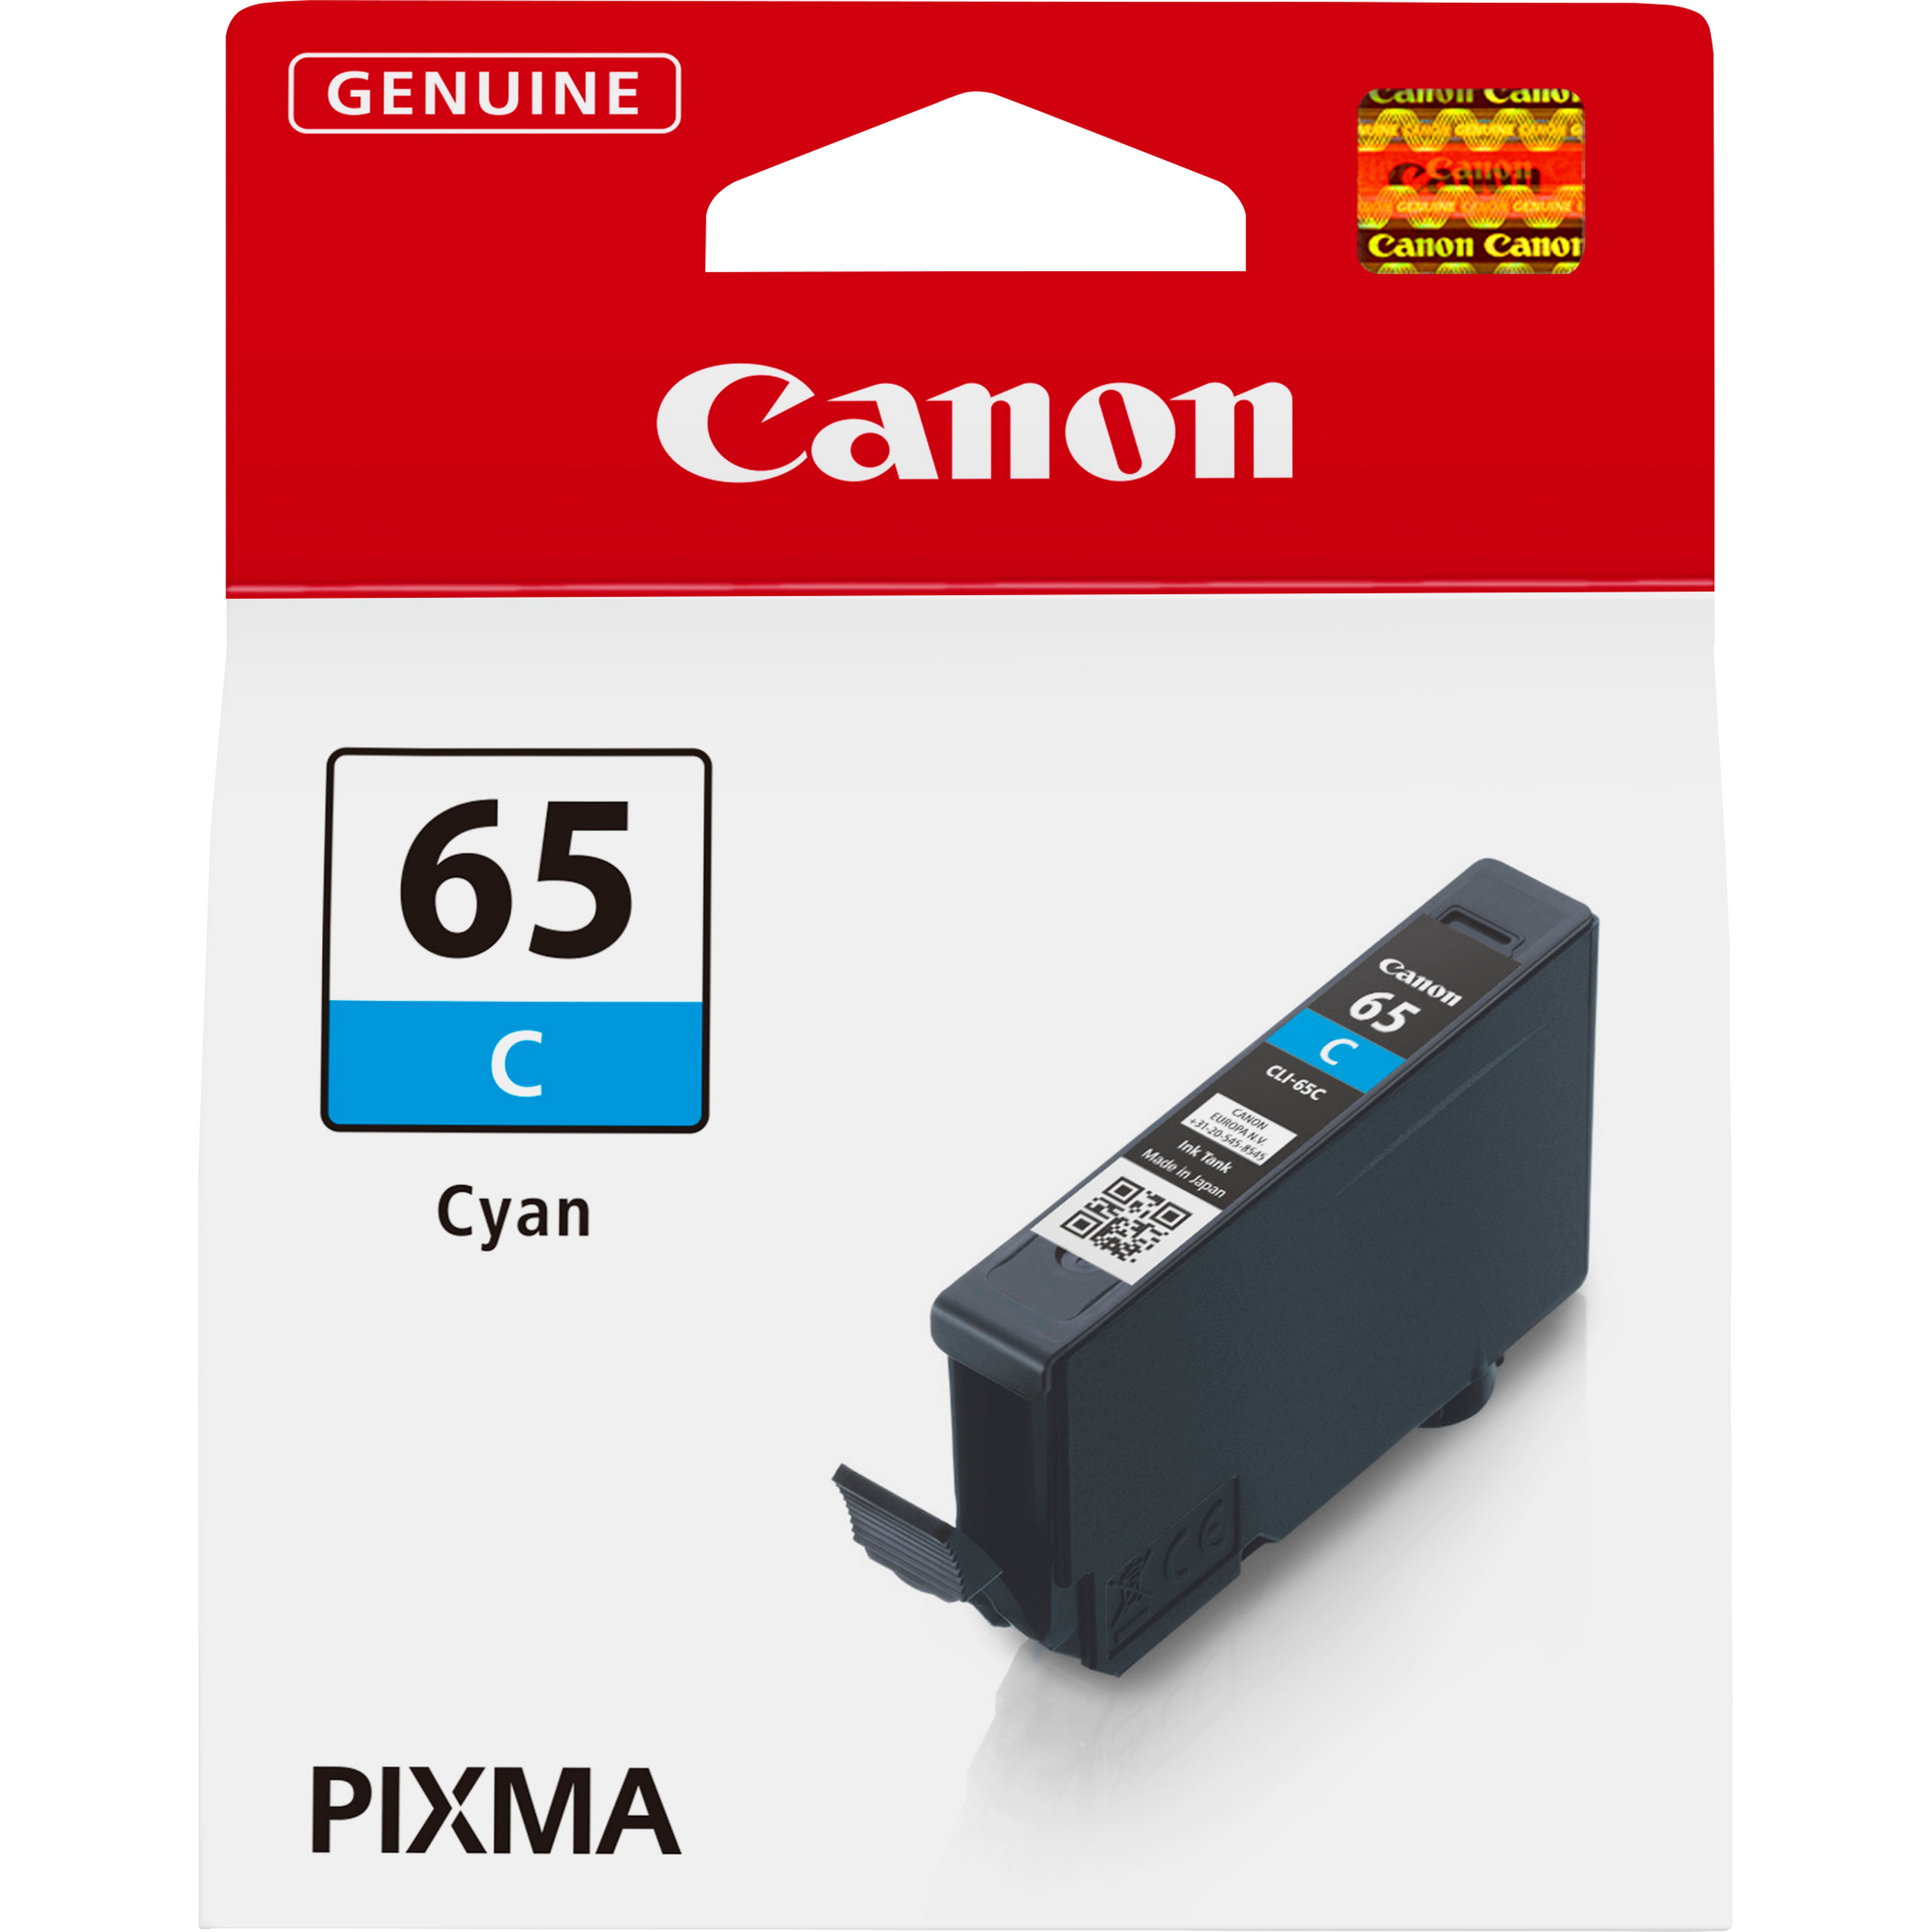 Canon 4216C001 single pack / cyaan